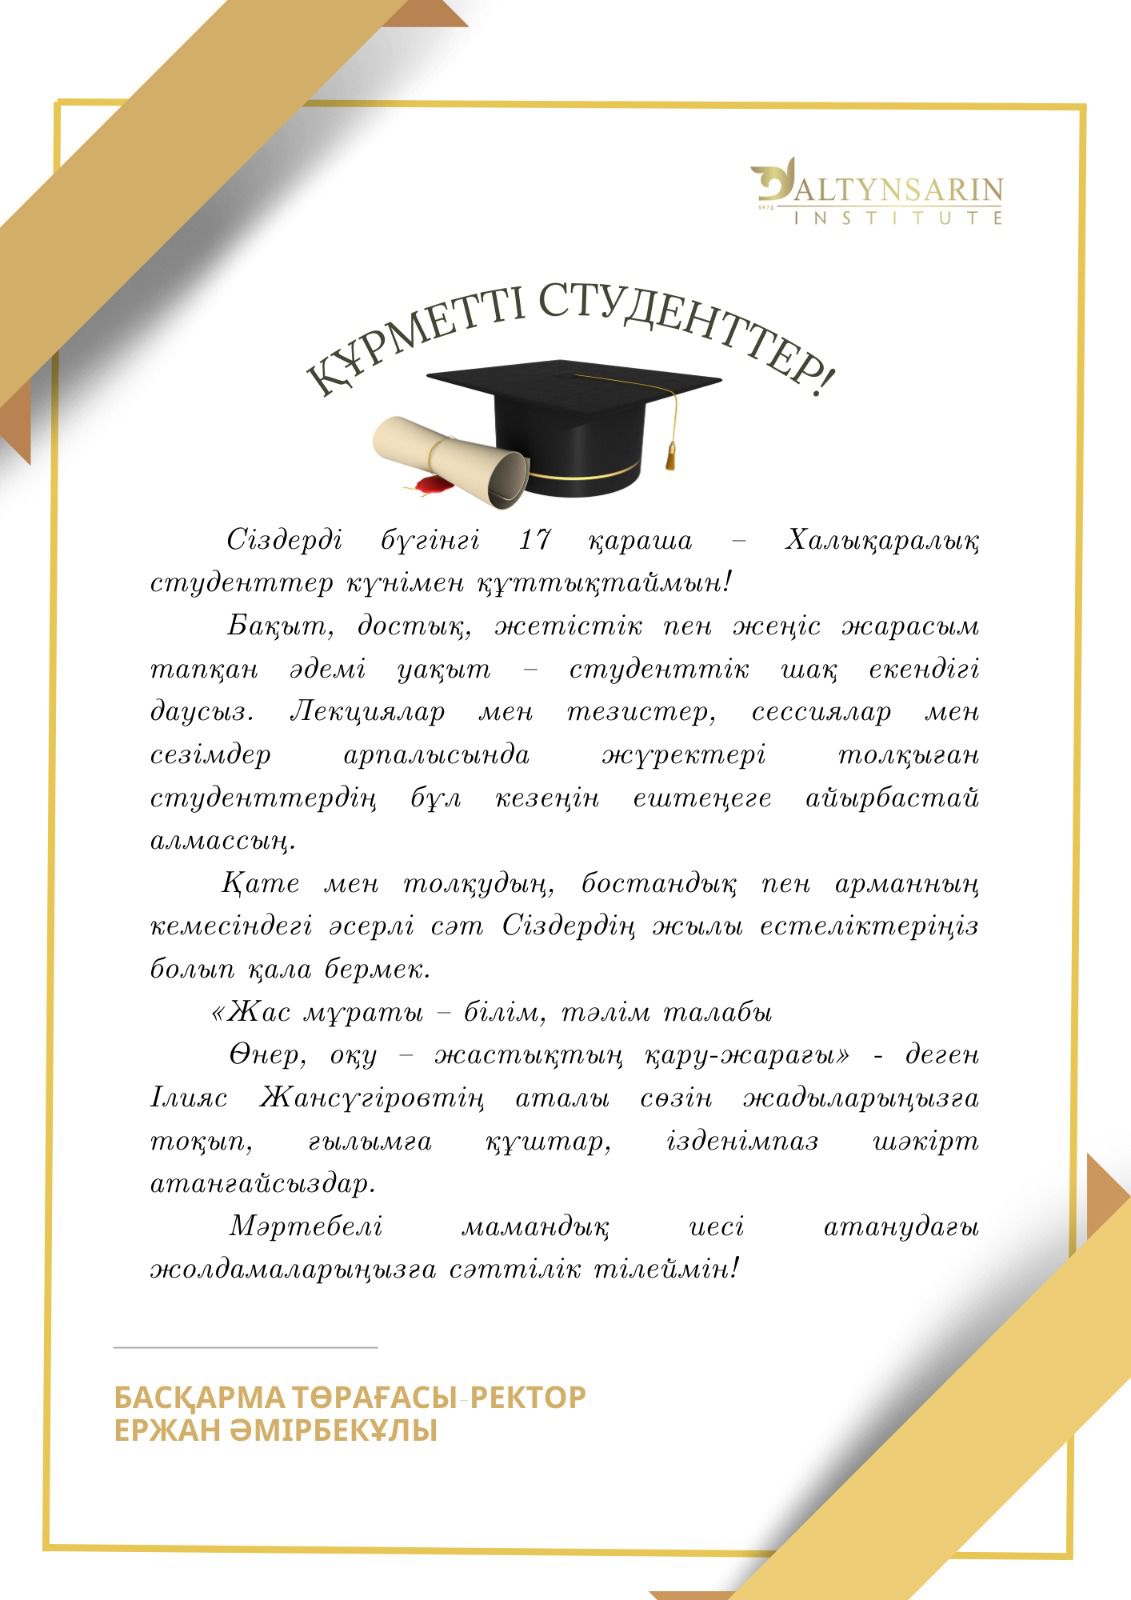 Chairman of the Board - Rector Yerzhan Amirbekuly congratulates on the international student holiday!